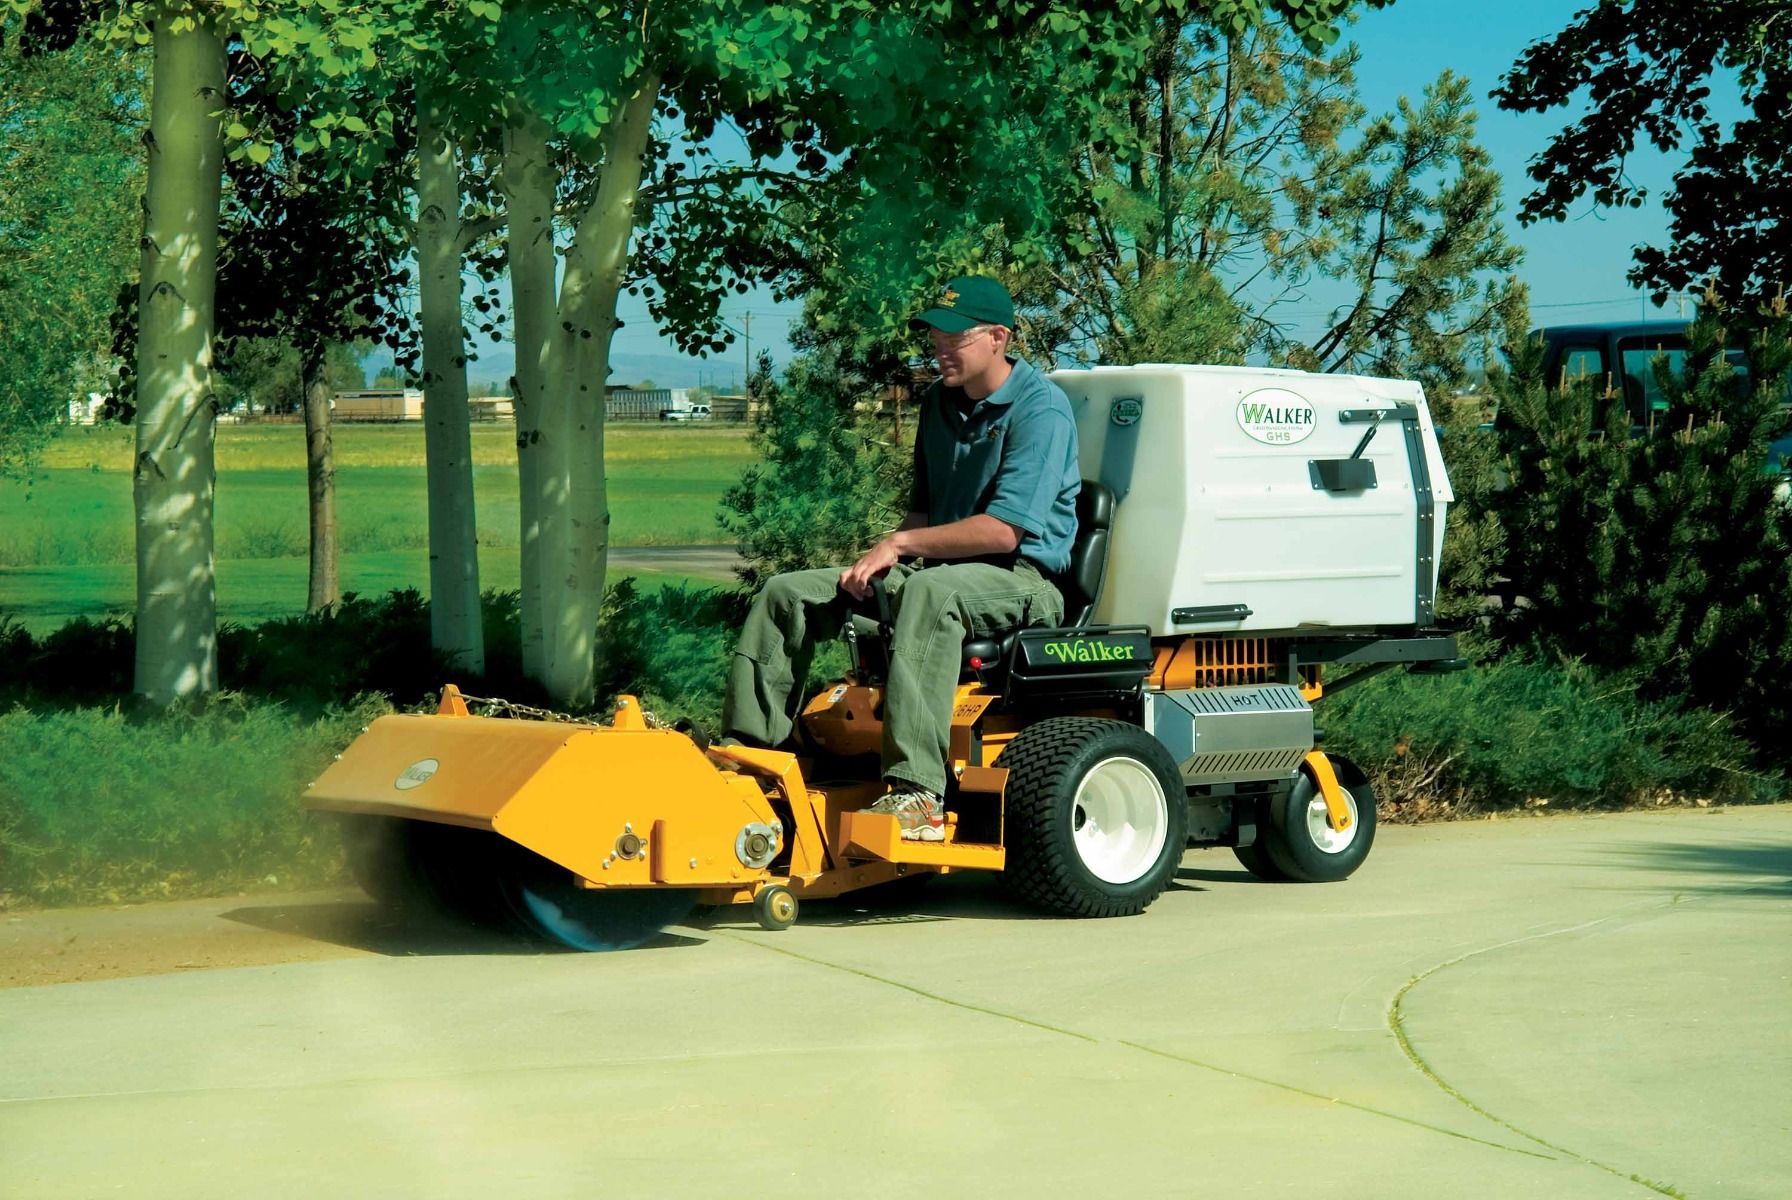 Ideal for sweeping debris on hard surfaces